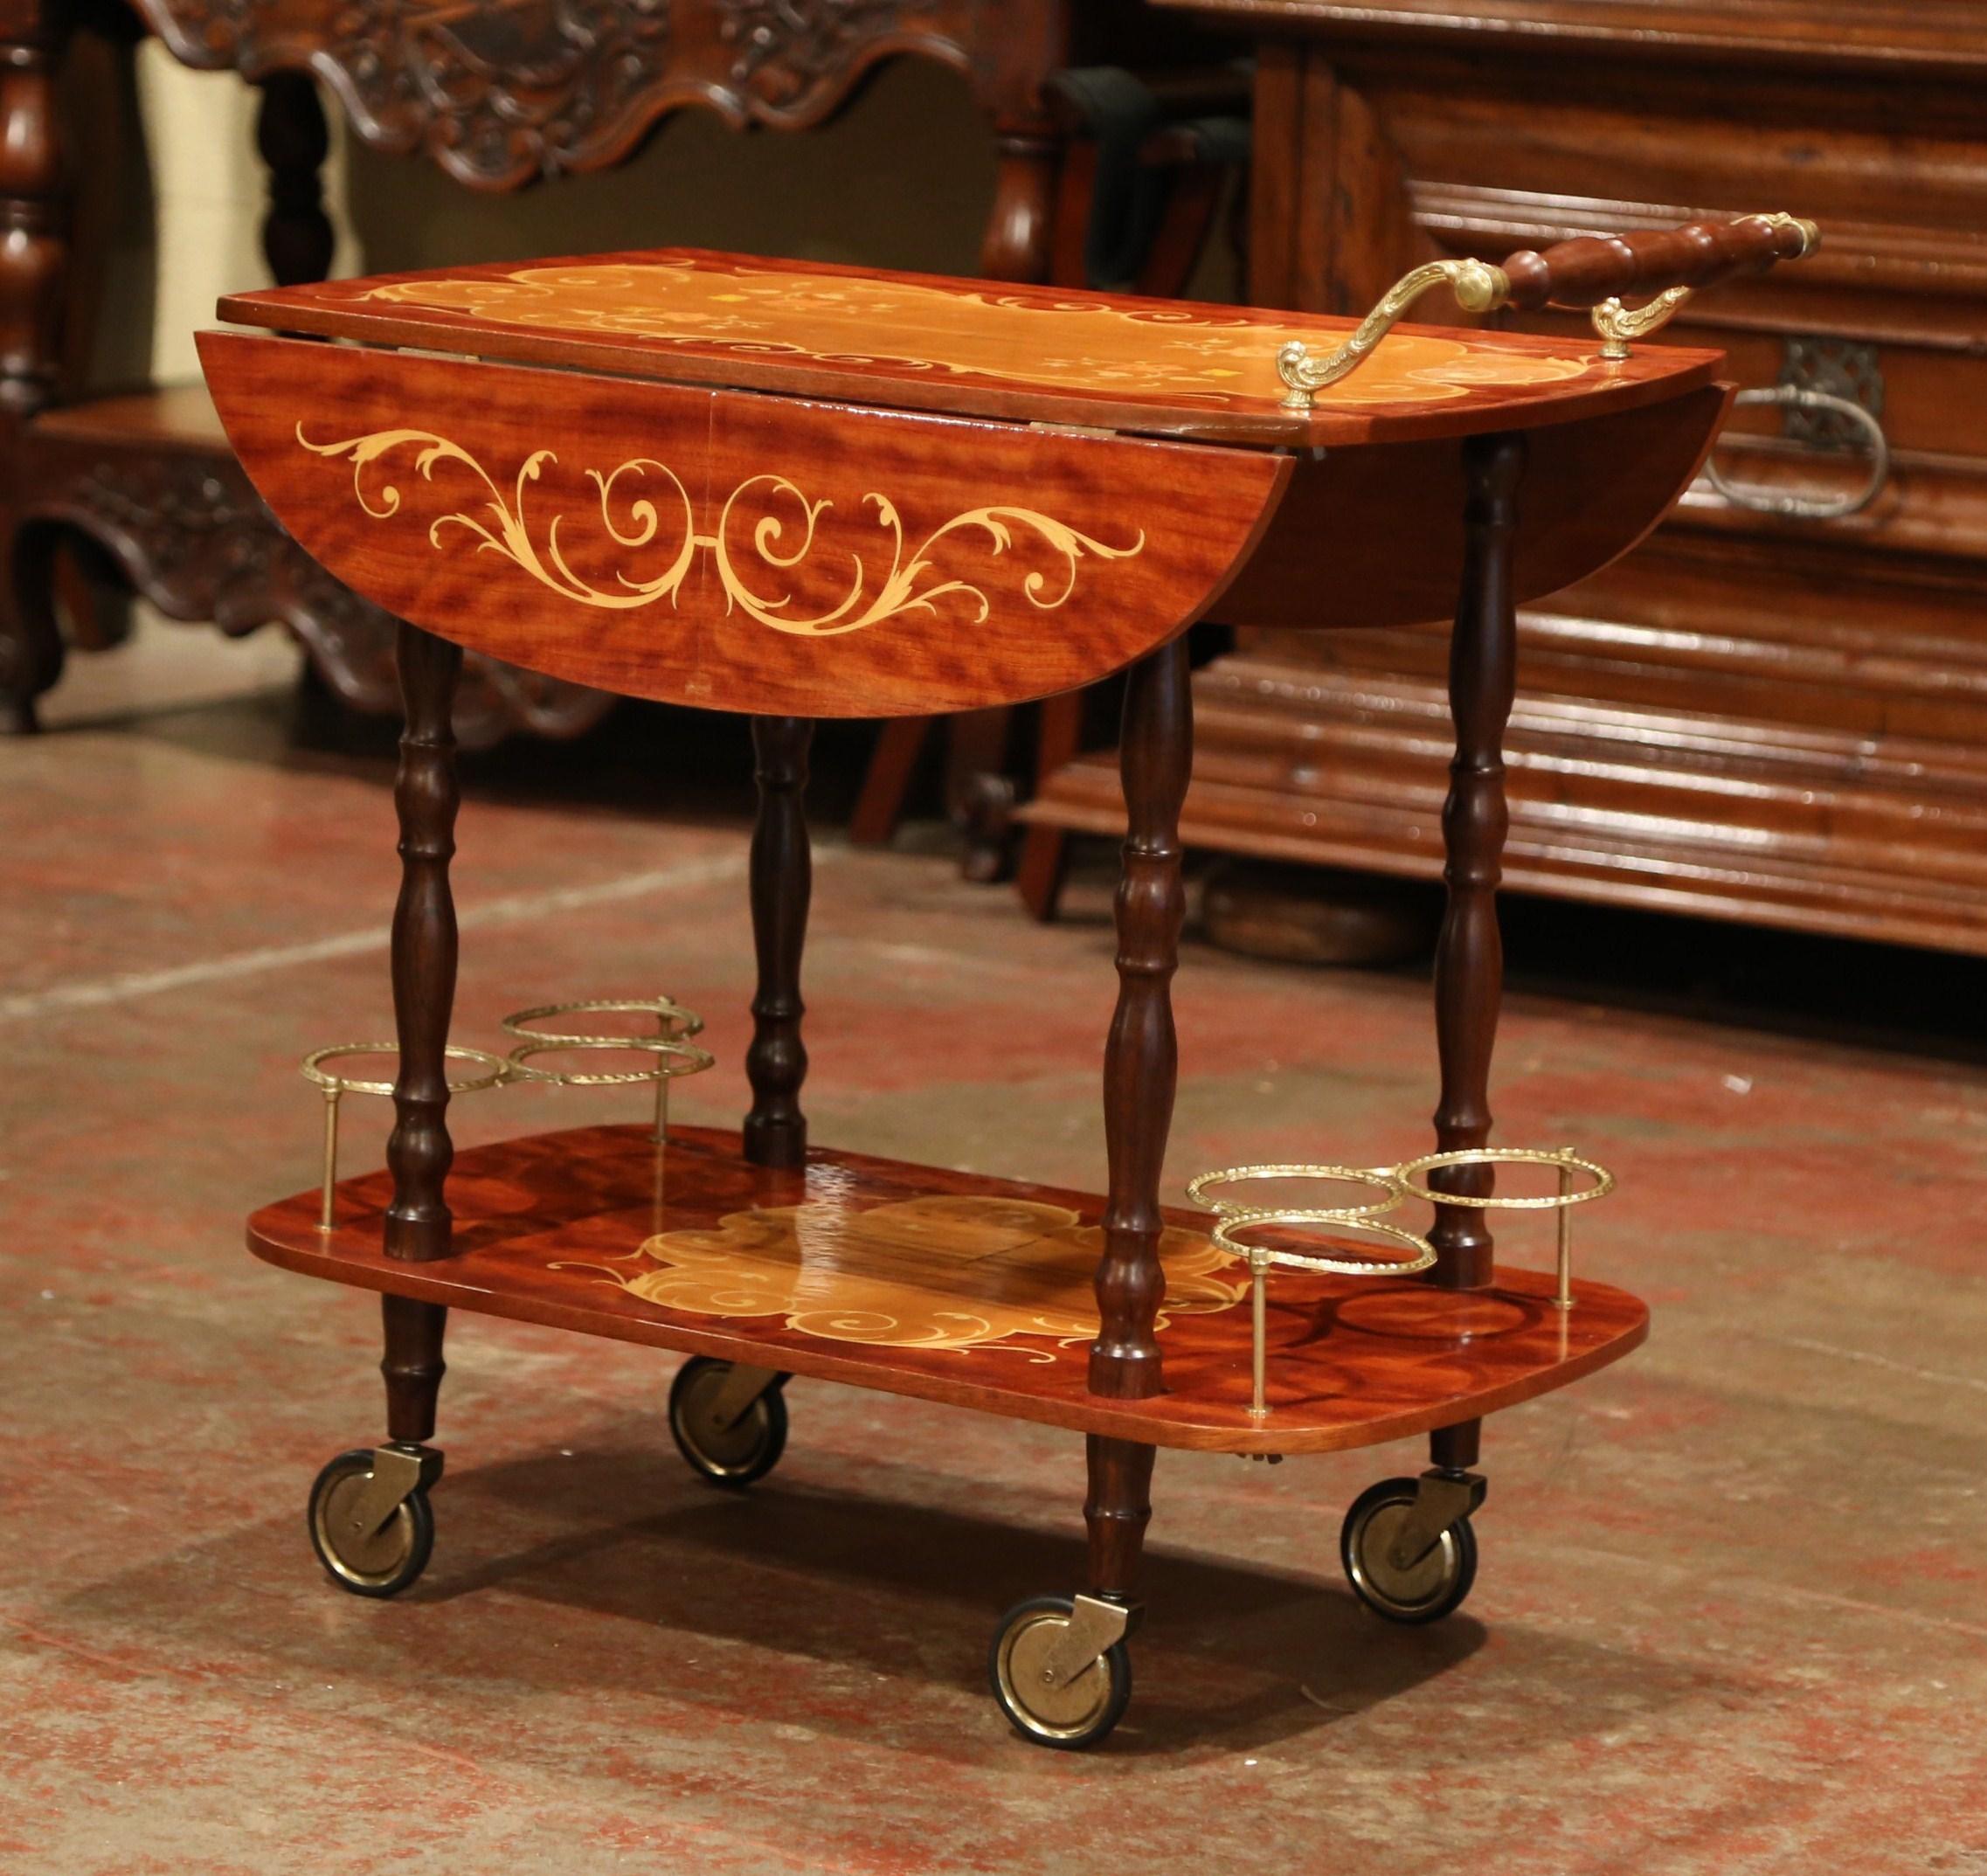 This fine wooden and brass cart was created in France, circa 1980. The brass cart sits on four wheels and features a large wooden and brass handle on one side. The two decks are connected with four turned spindles, and are decorated with wonderful